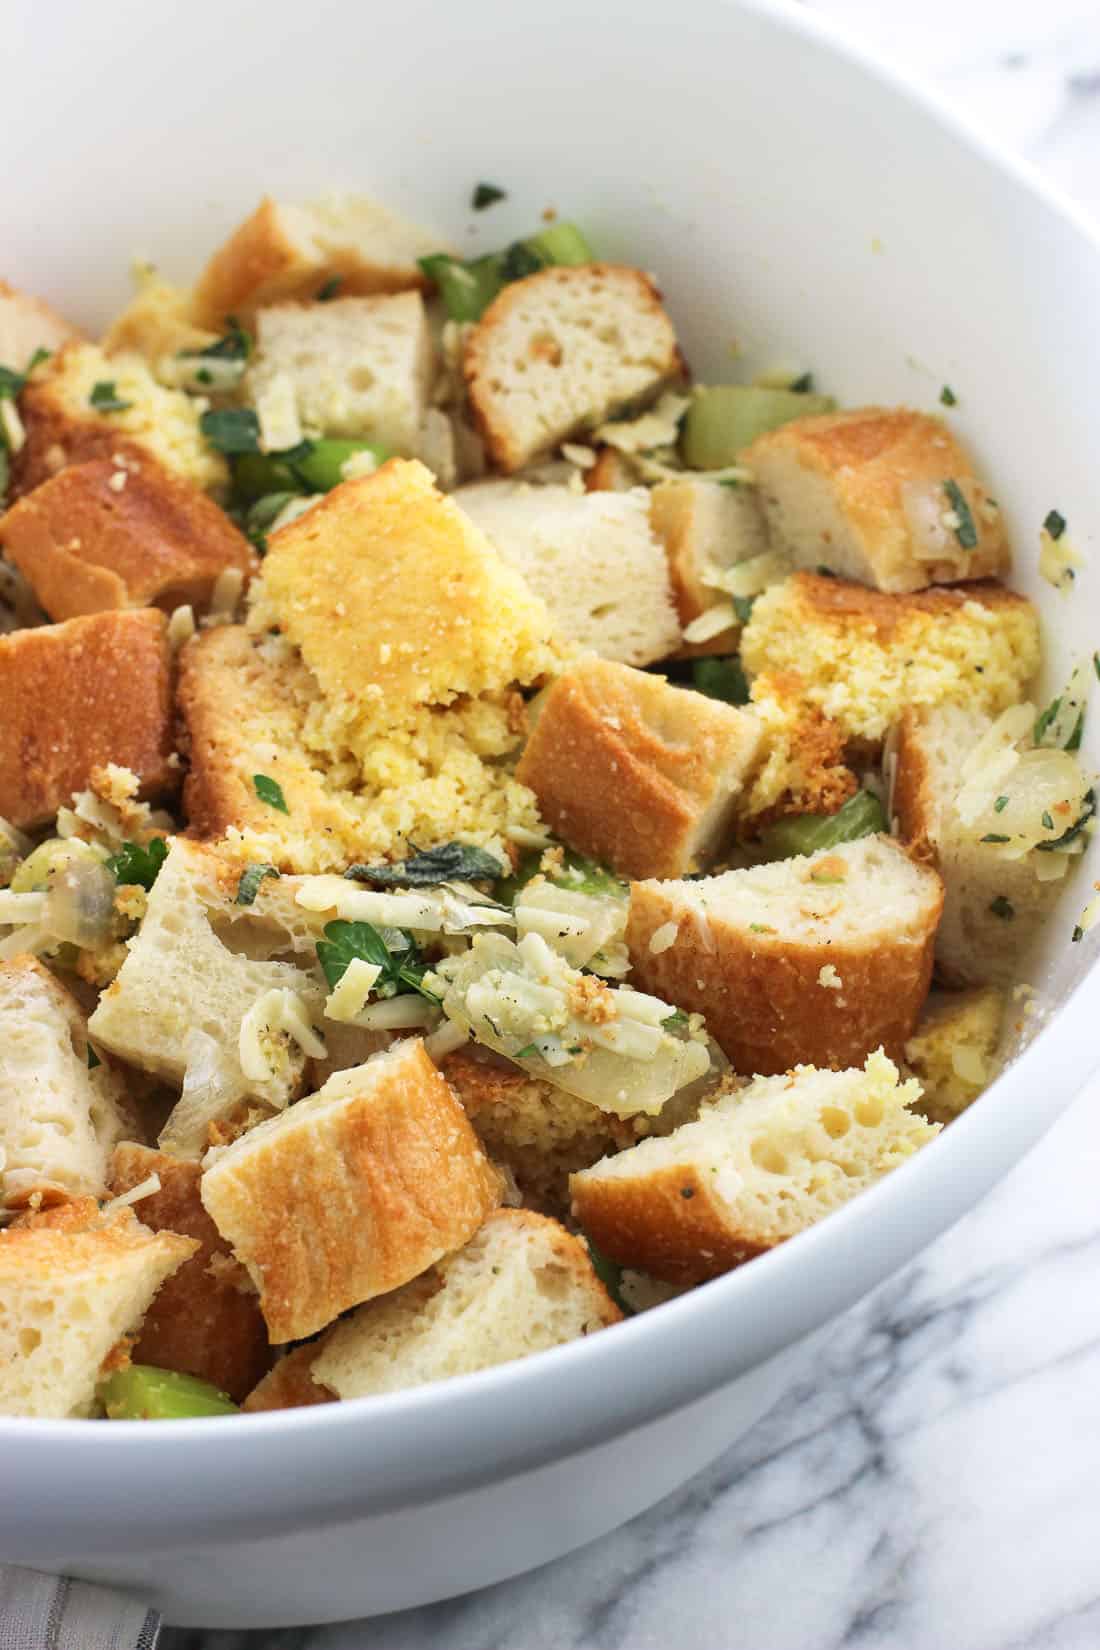 Cornbread and baguette cubes, grated cheese, diced herbs, and vegetables in a large mixing bowl